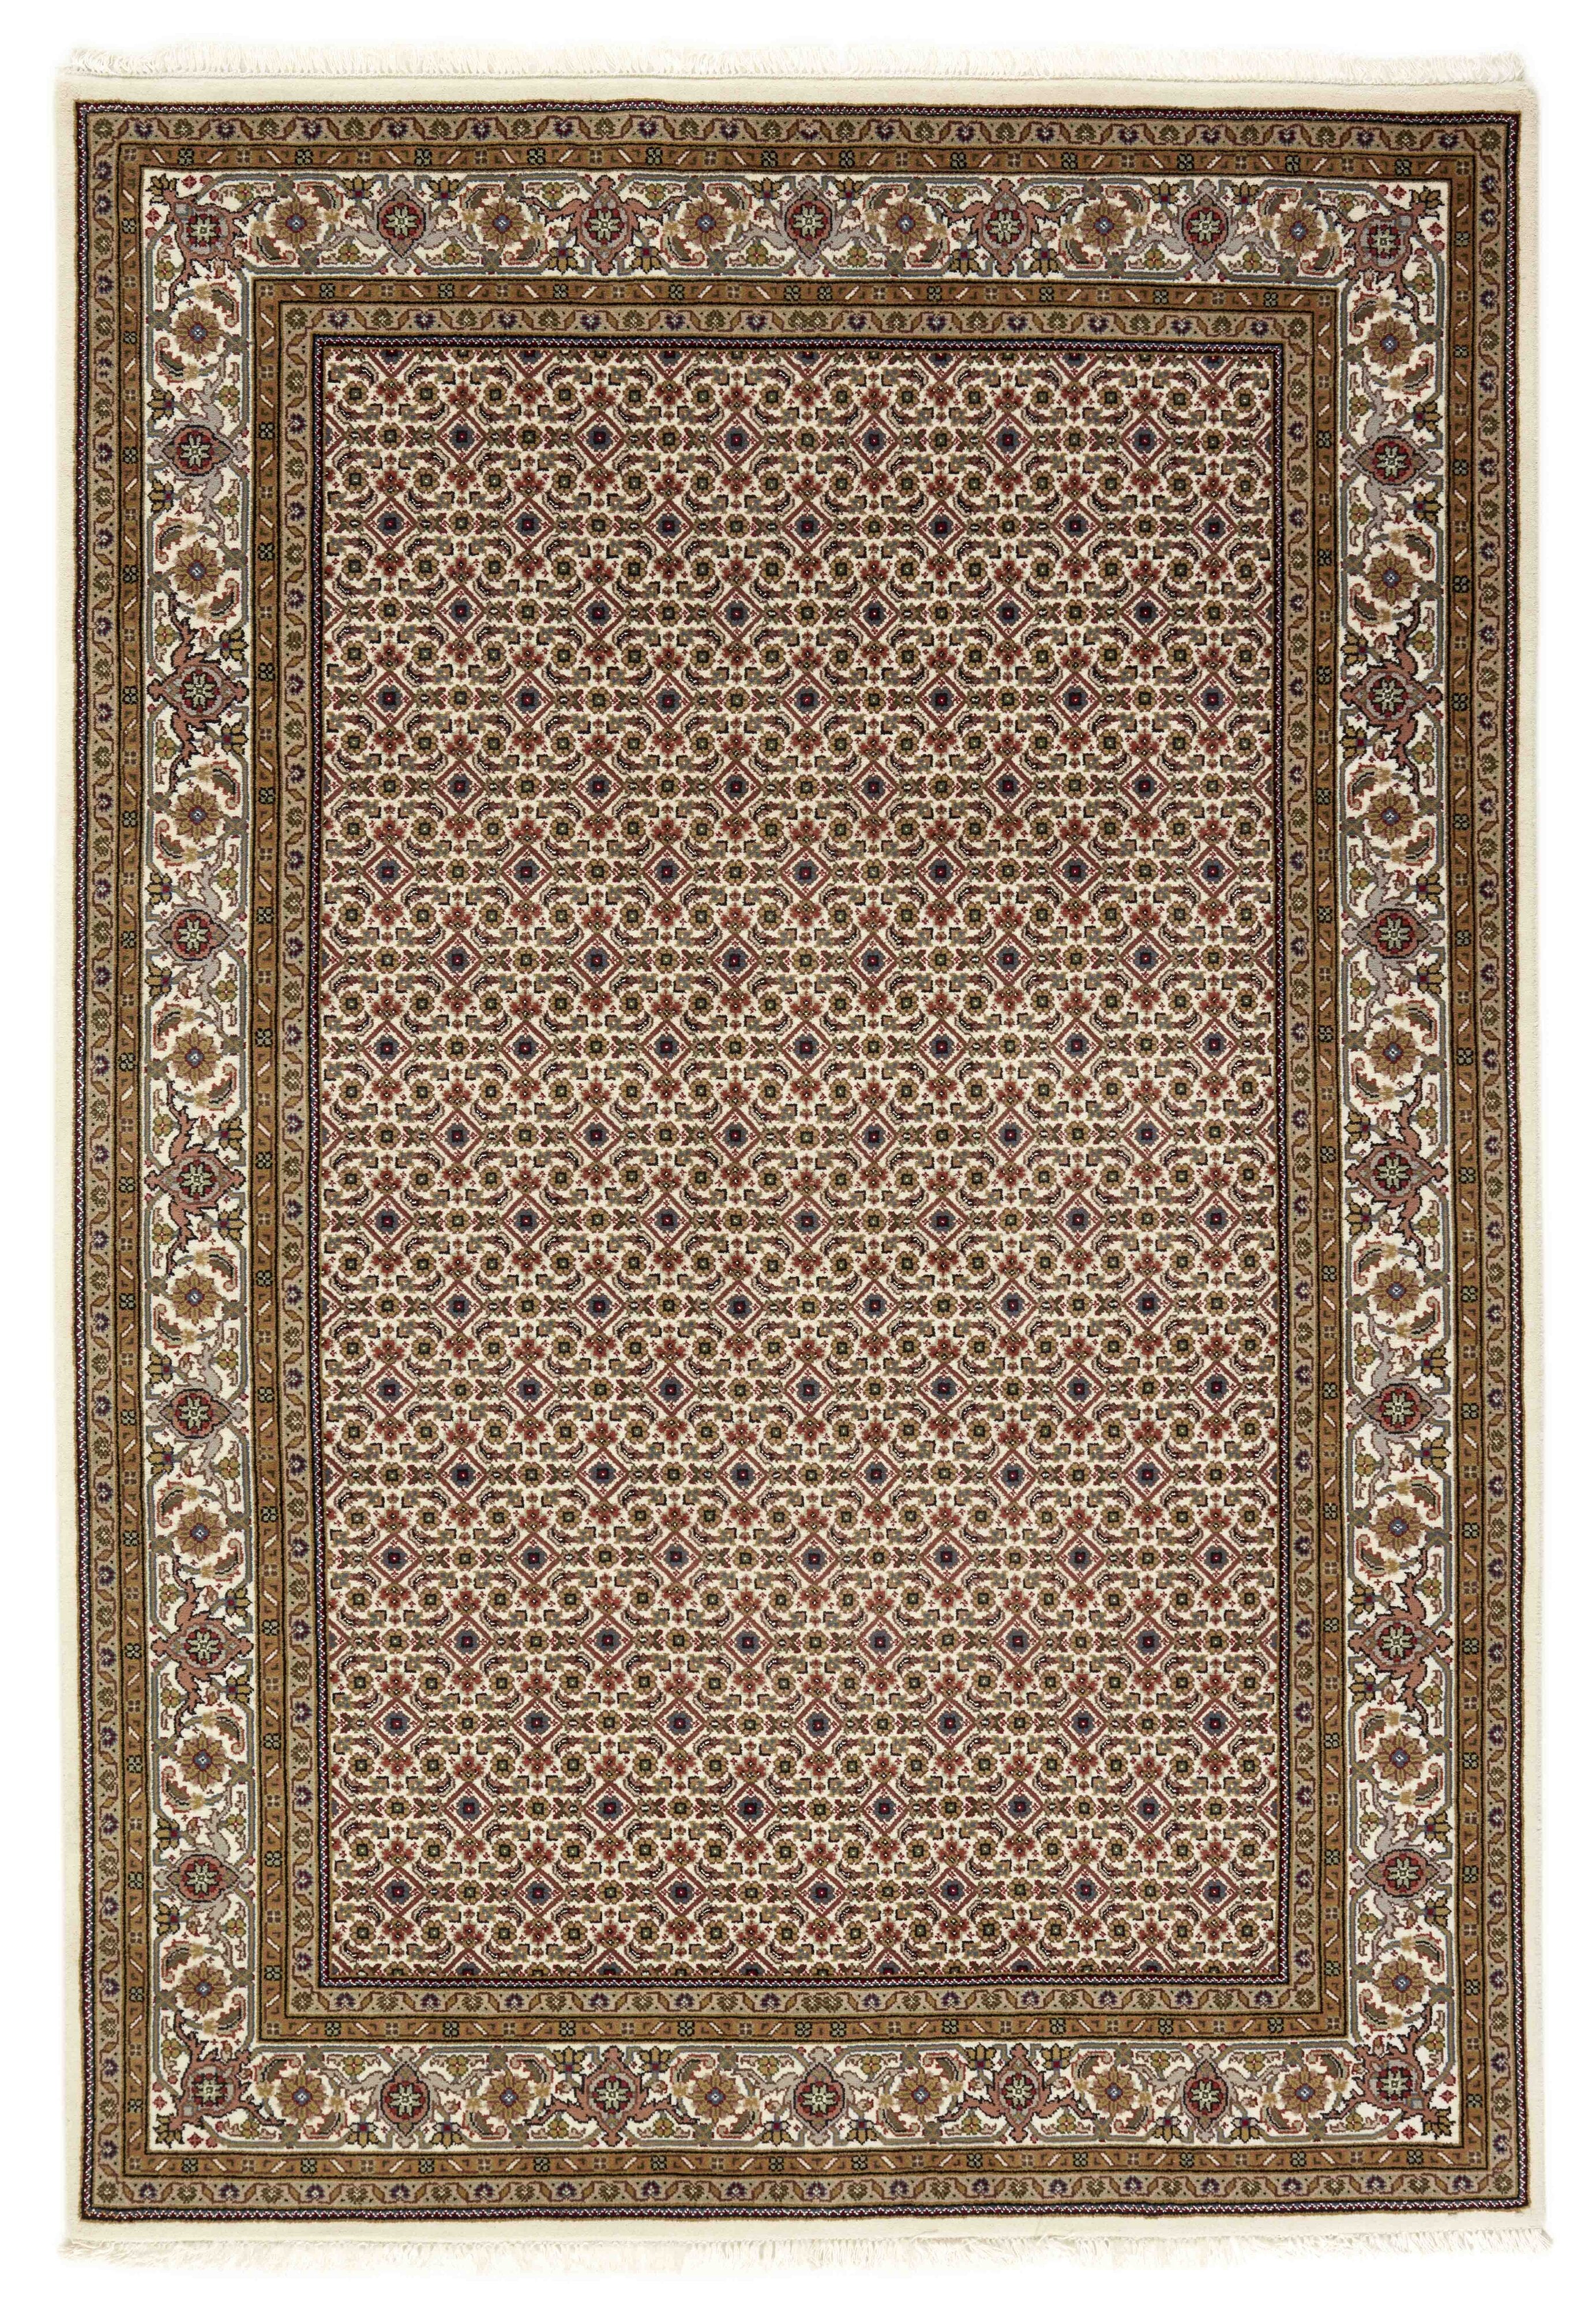 Authentic Oriental Tabriz Indi rug with multicolour floral bordered pattern